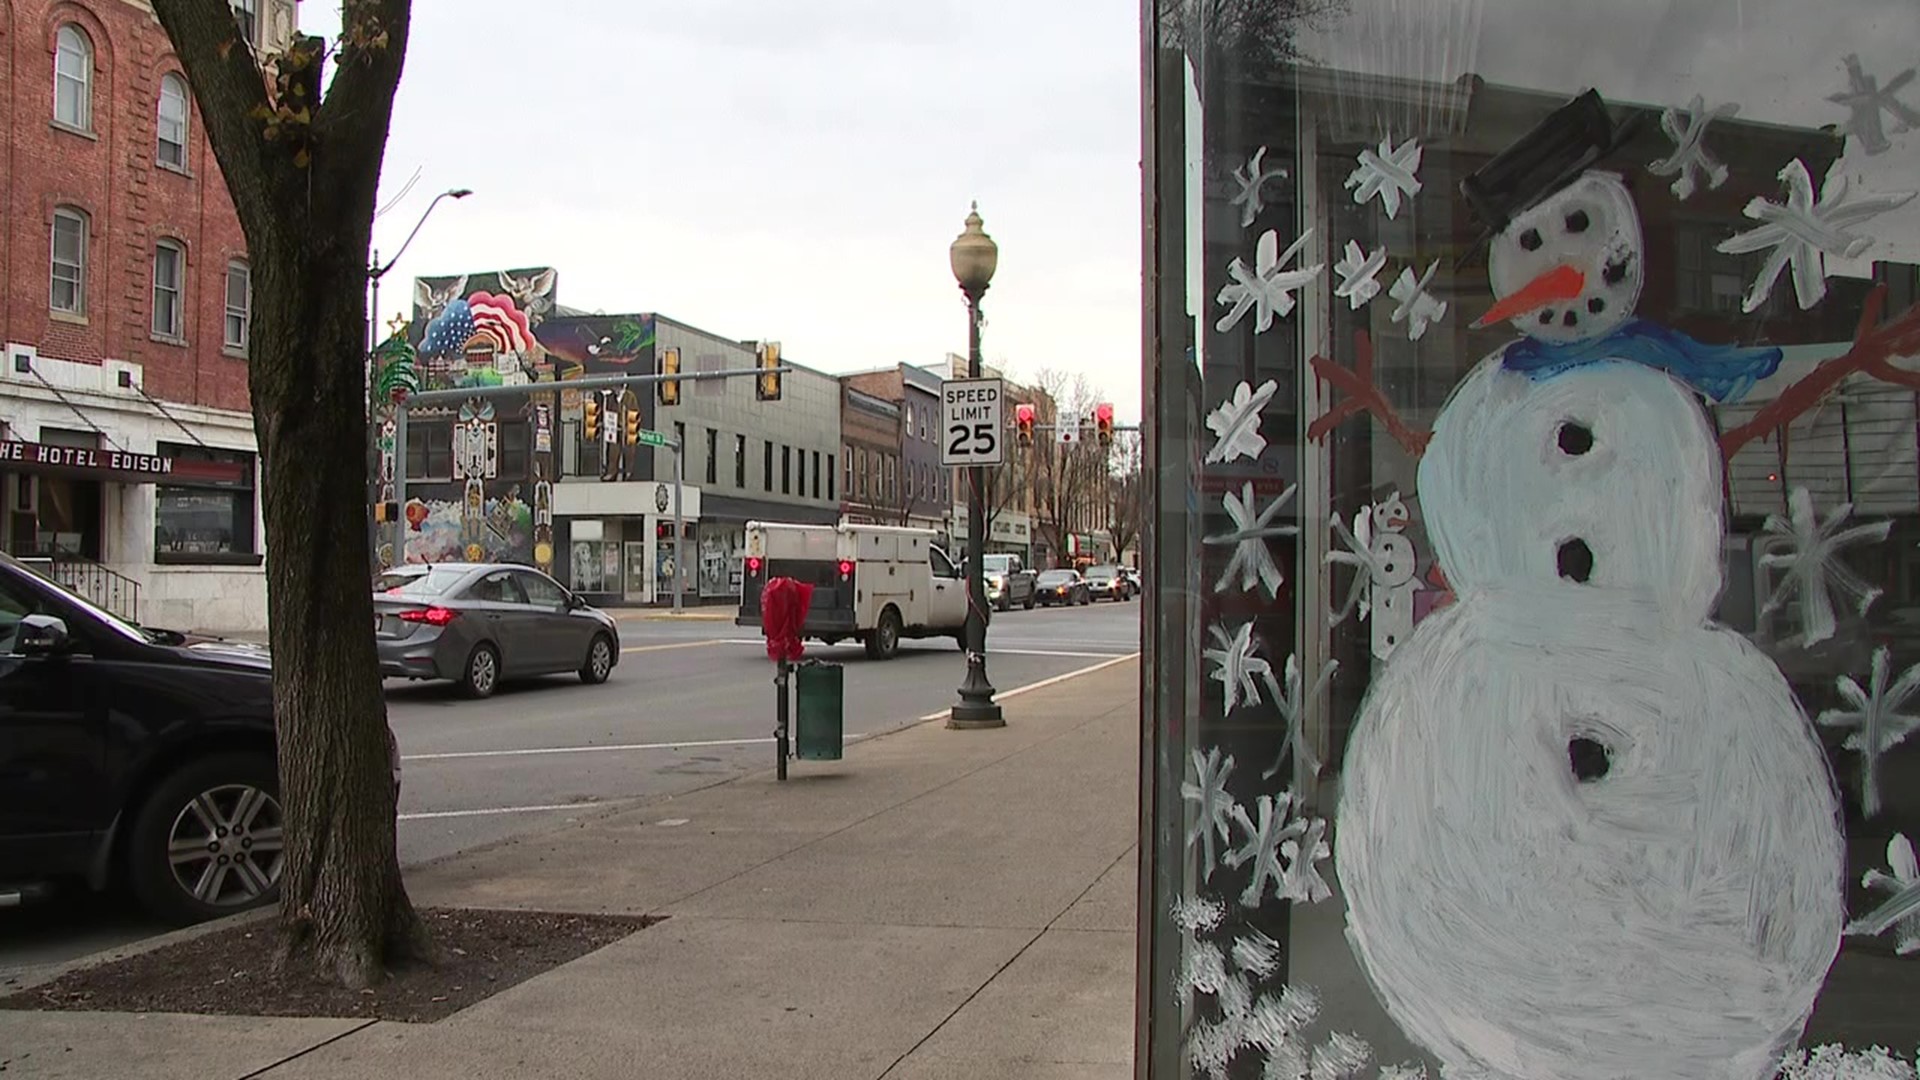 The city is holding a late-night shopping event this Thursday. Newswatch 16's Nikki Krize spoke with some business owners who are busy preparing.